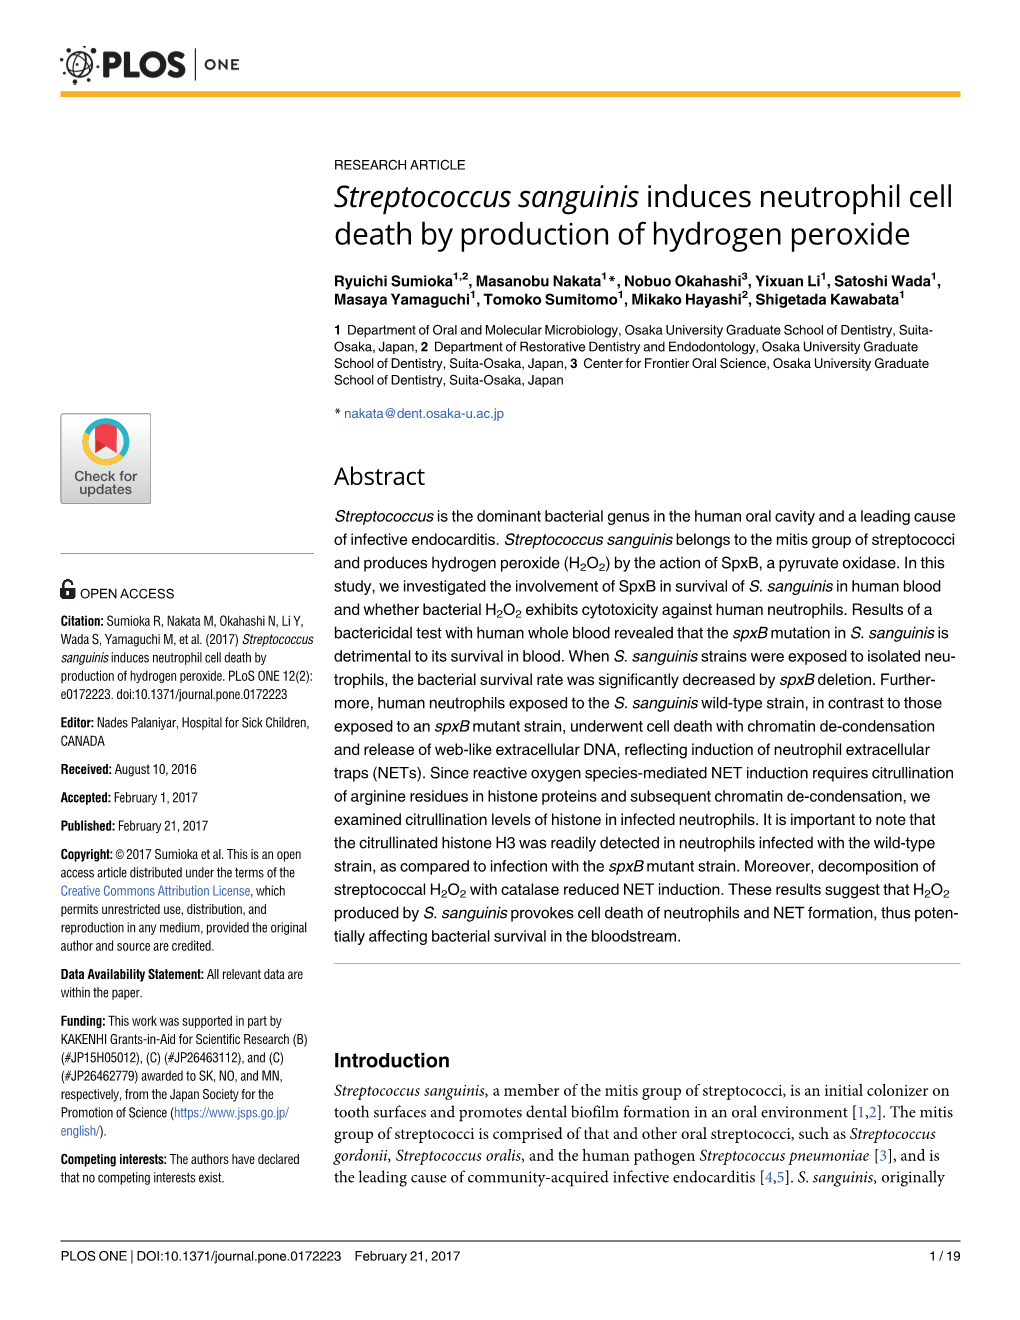 Streptococcus Sanguinis Induces Neutrophil Cell Death by Production of Hydrogen Peroxide